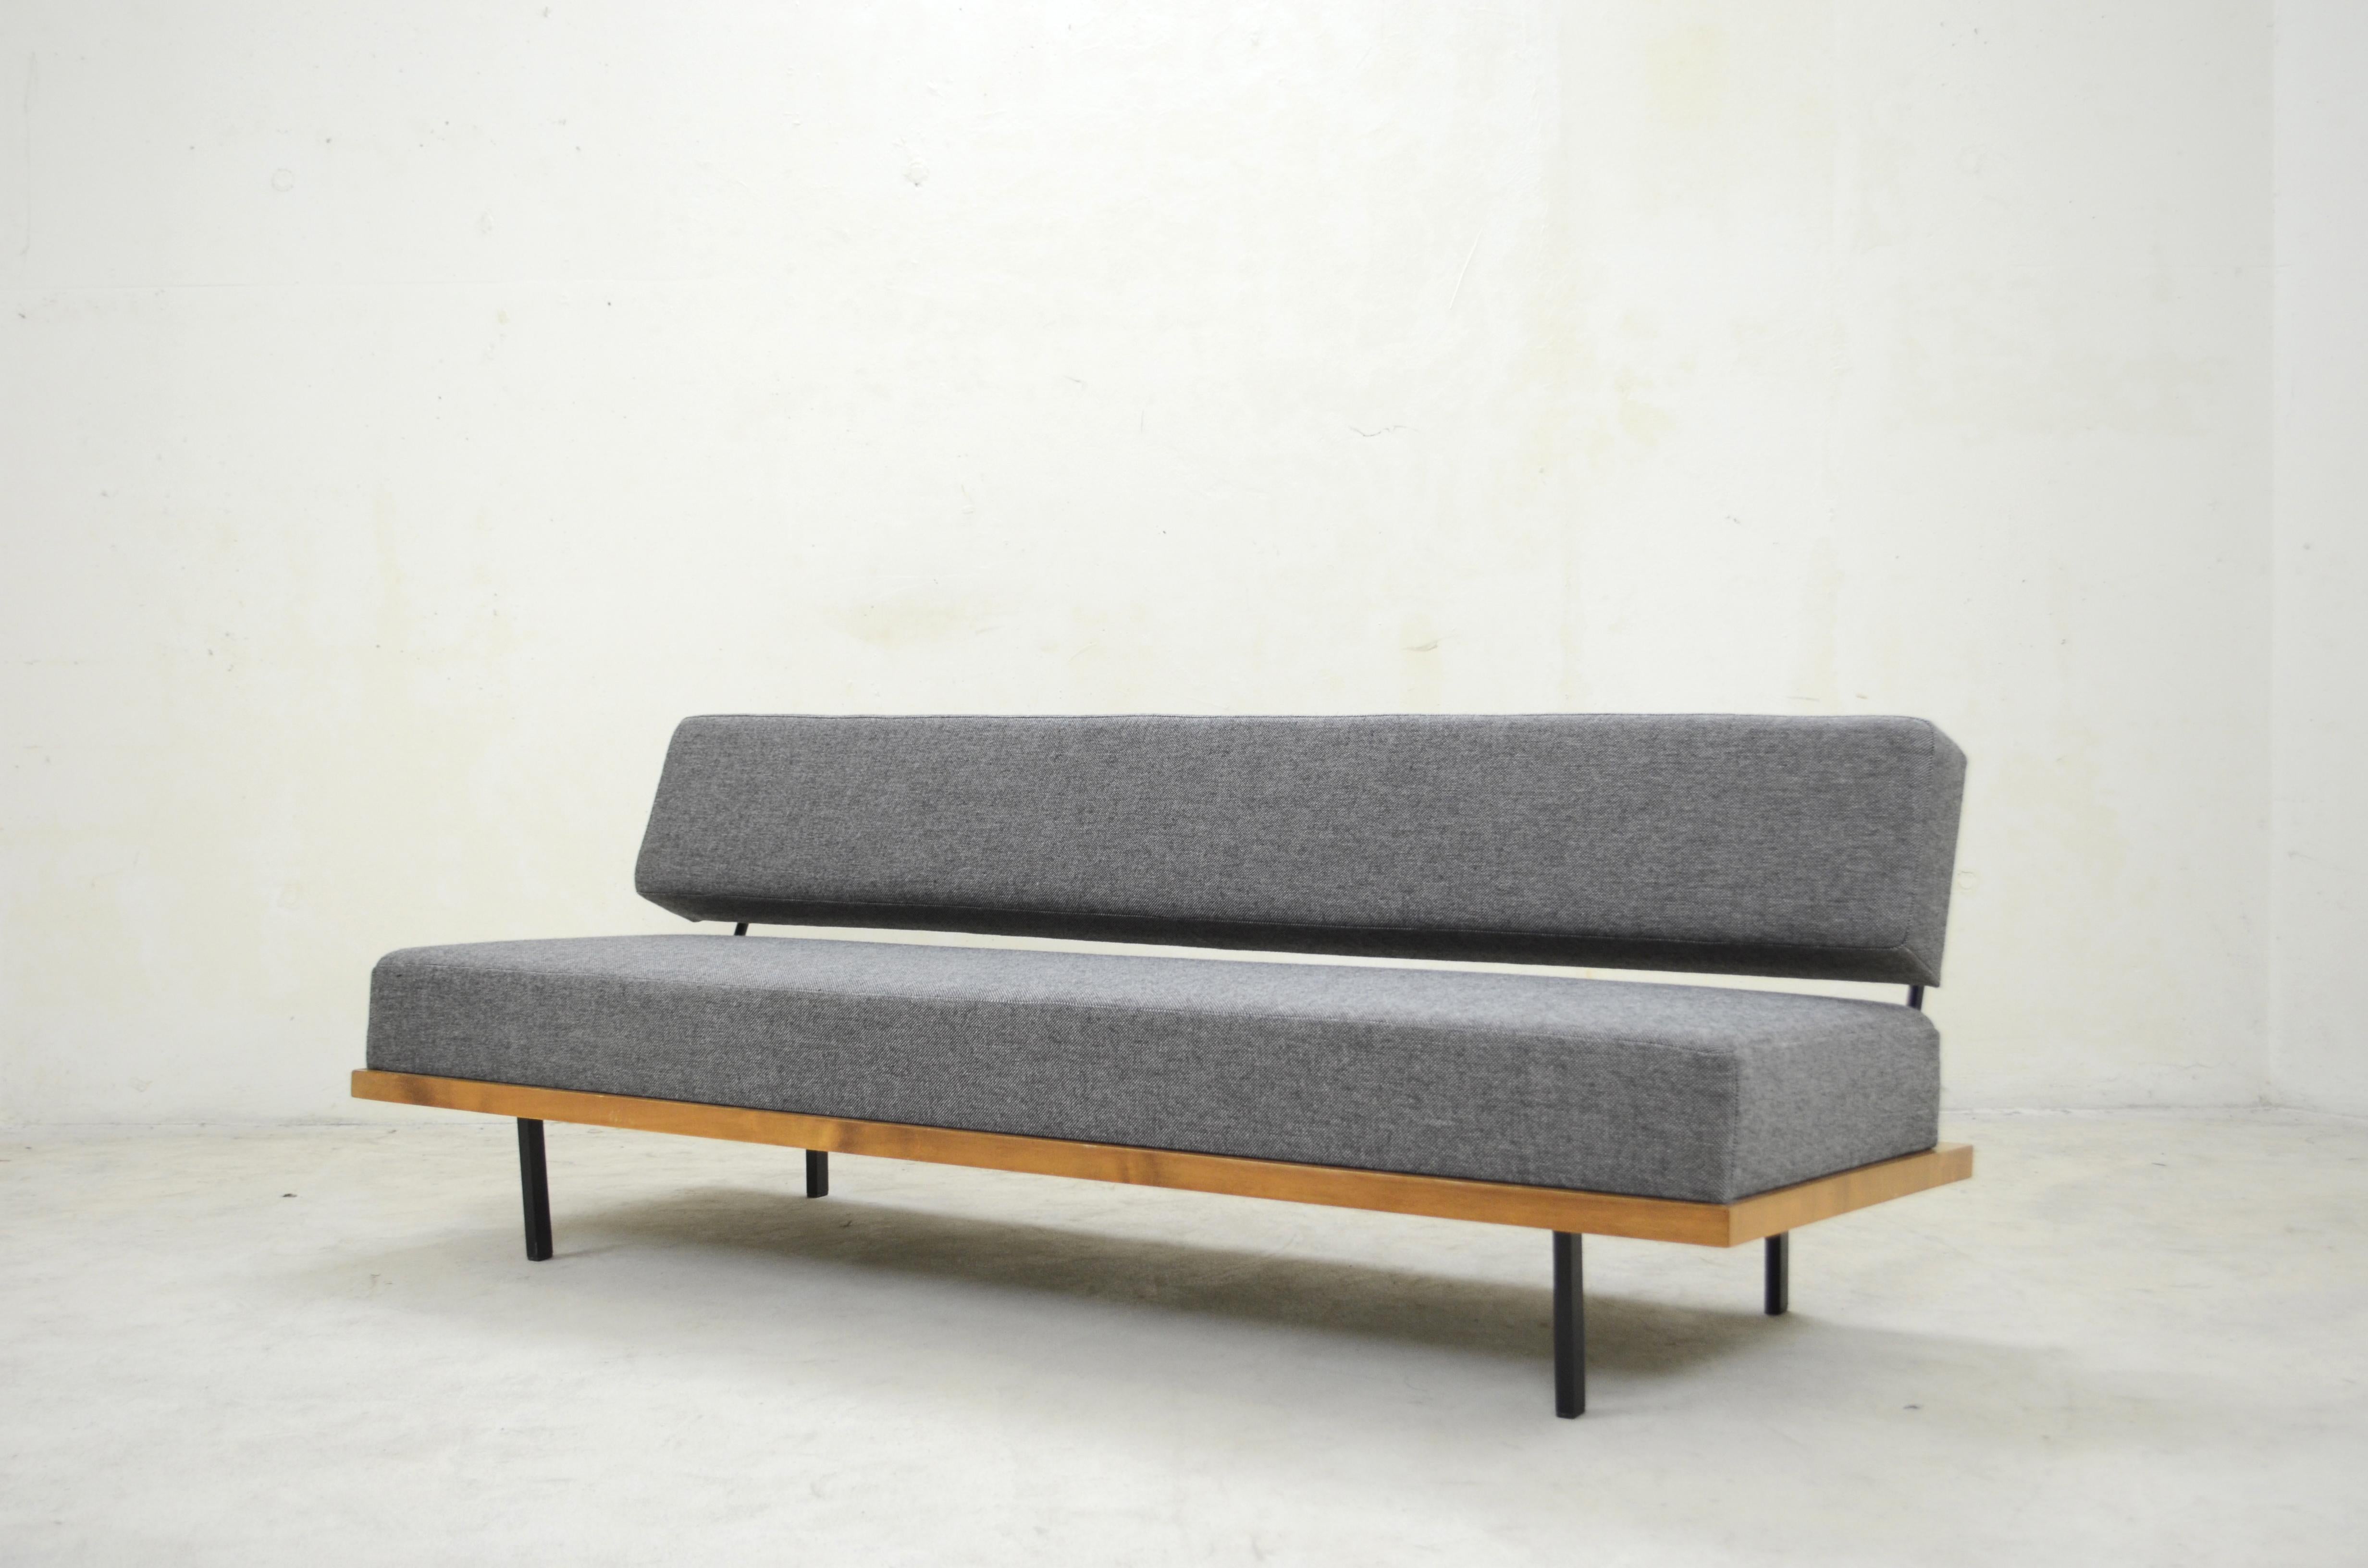 Knoll International manufactures this daybed sofa.Design by Florence Knoll in the year 1958.
It has a convertible backrest for using as an daybed.
A simply and classic daybed from the Mid Century.
It was upholstered and the fabric is renewed in